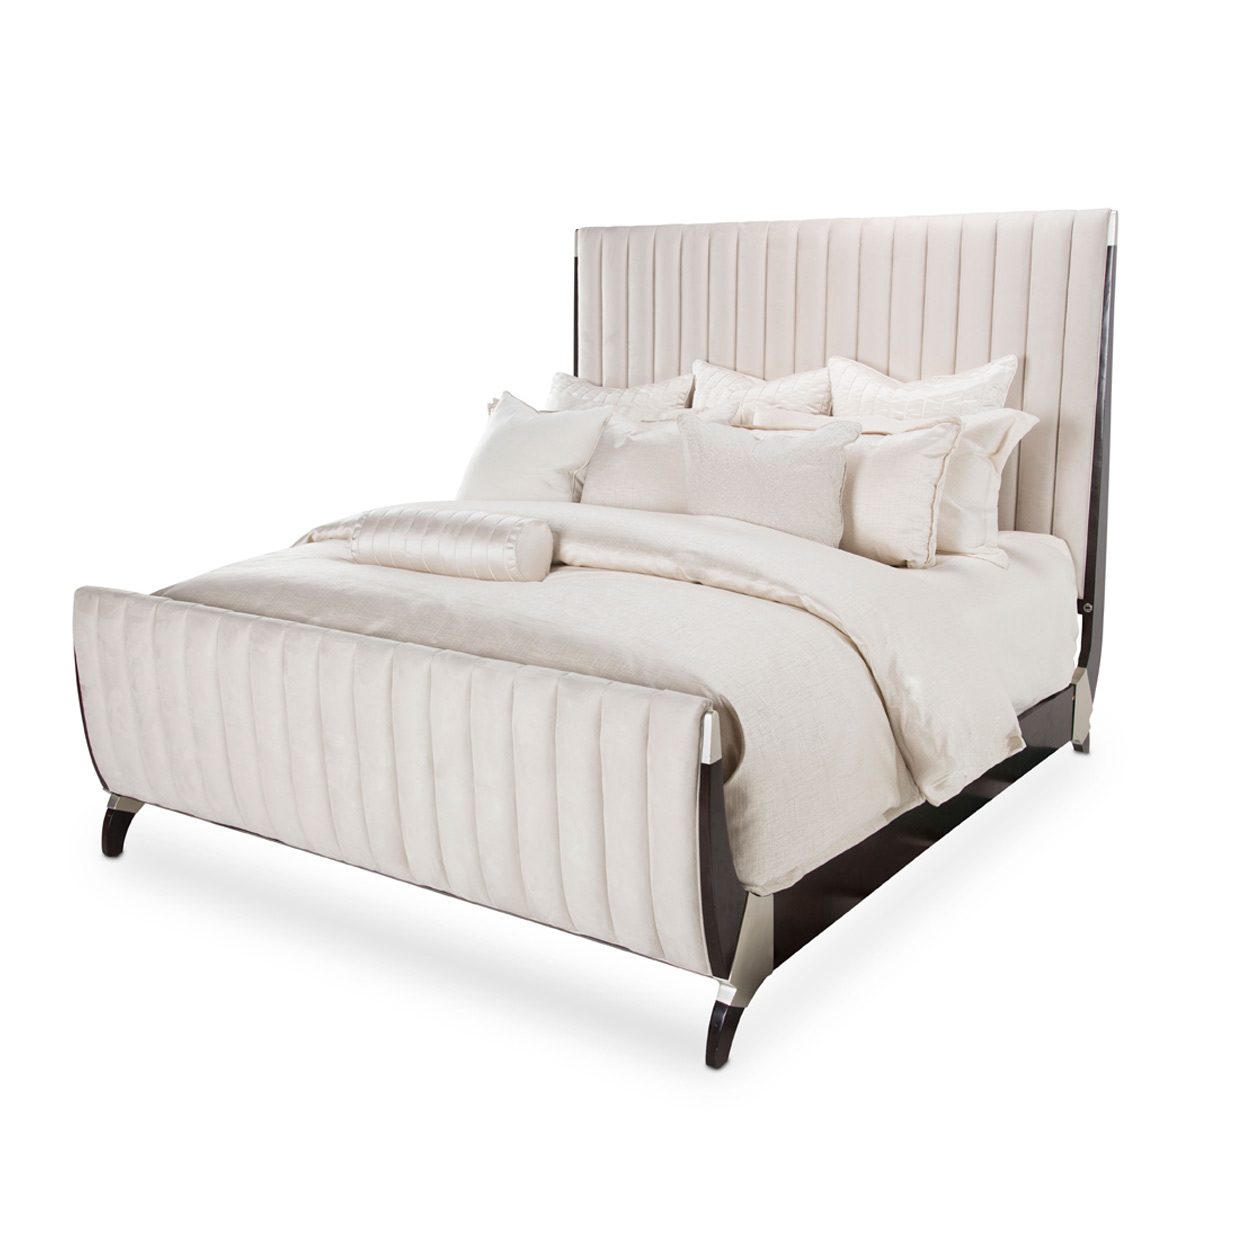 Aico Furniture Channel Tufted Sleigh Bedroom Set